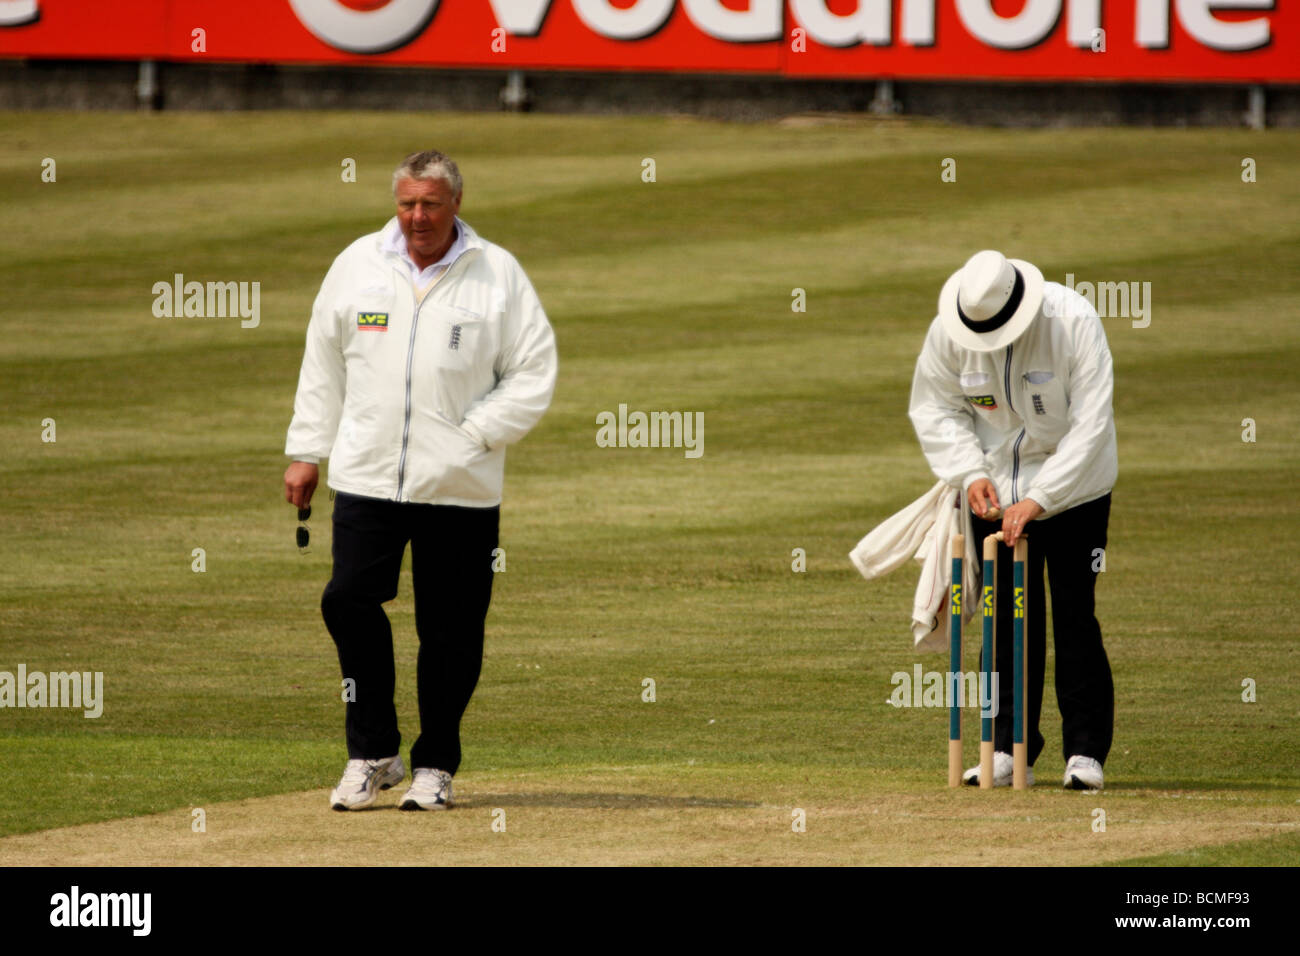 Umpires, Mike 'Pasty' Harris & Richard Kettleborough, putting on the bails before a session of County Championship Cricket Stock Photo